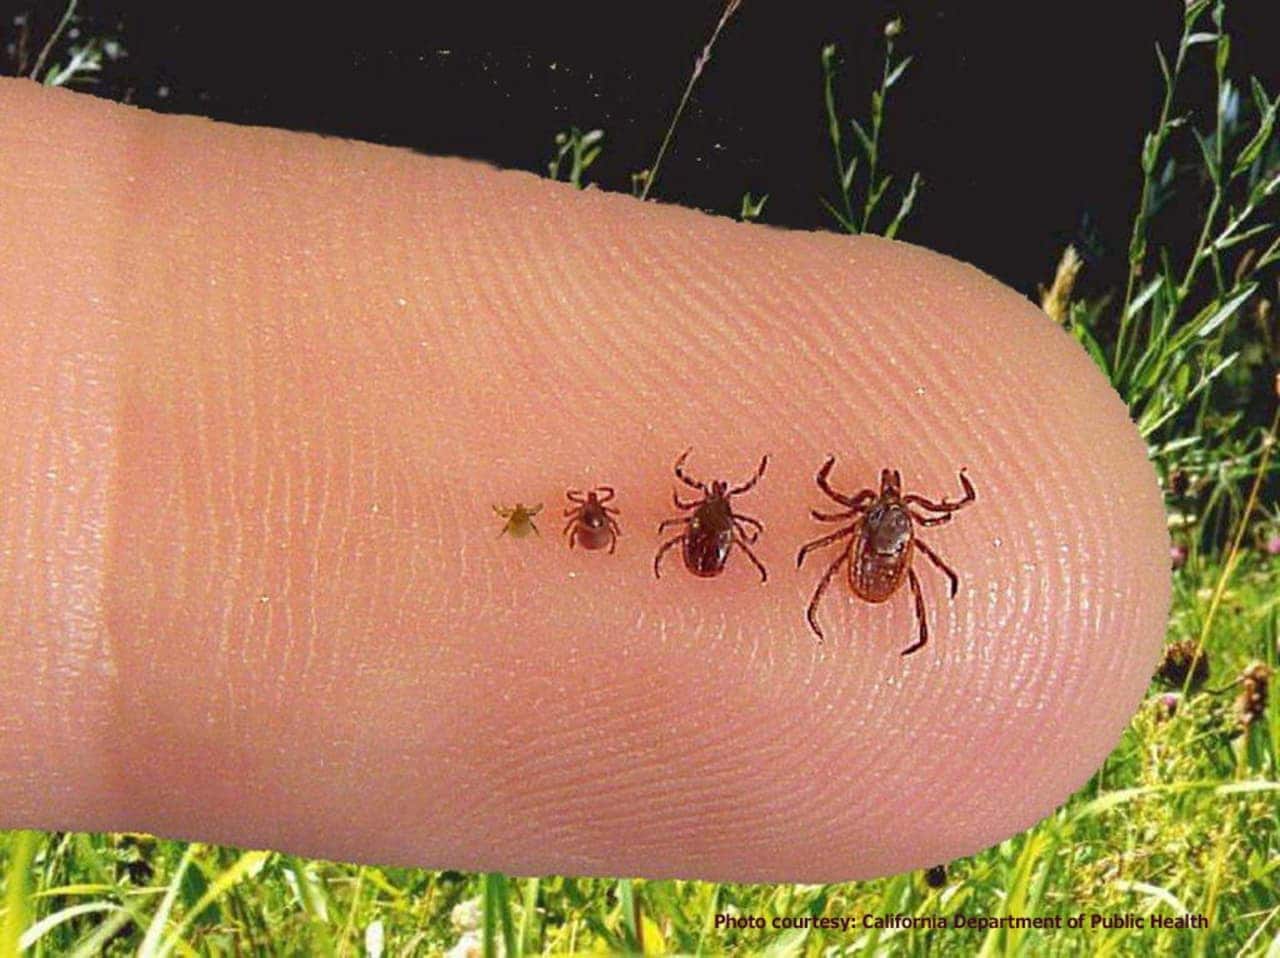 The smallest tick, which looks like a black dot, is a seed tick.